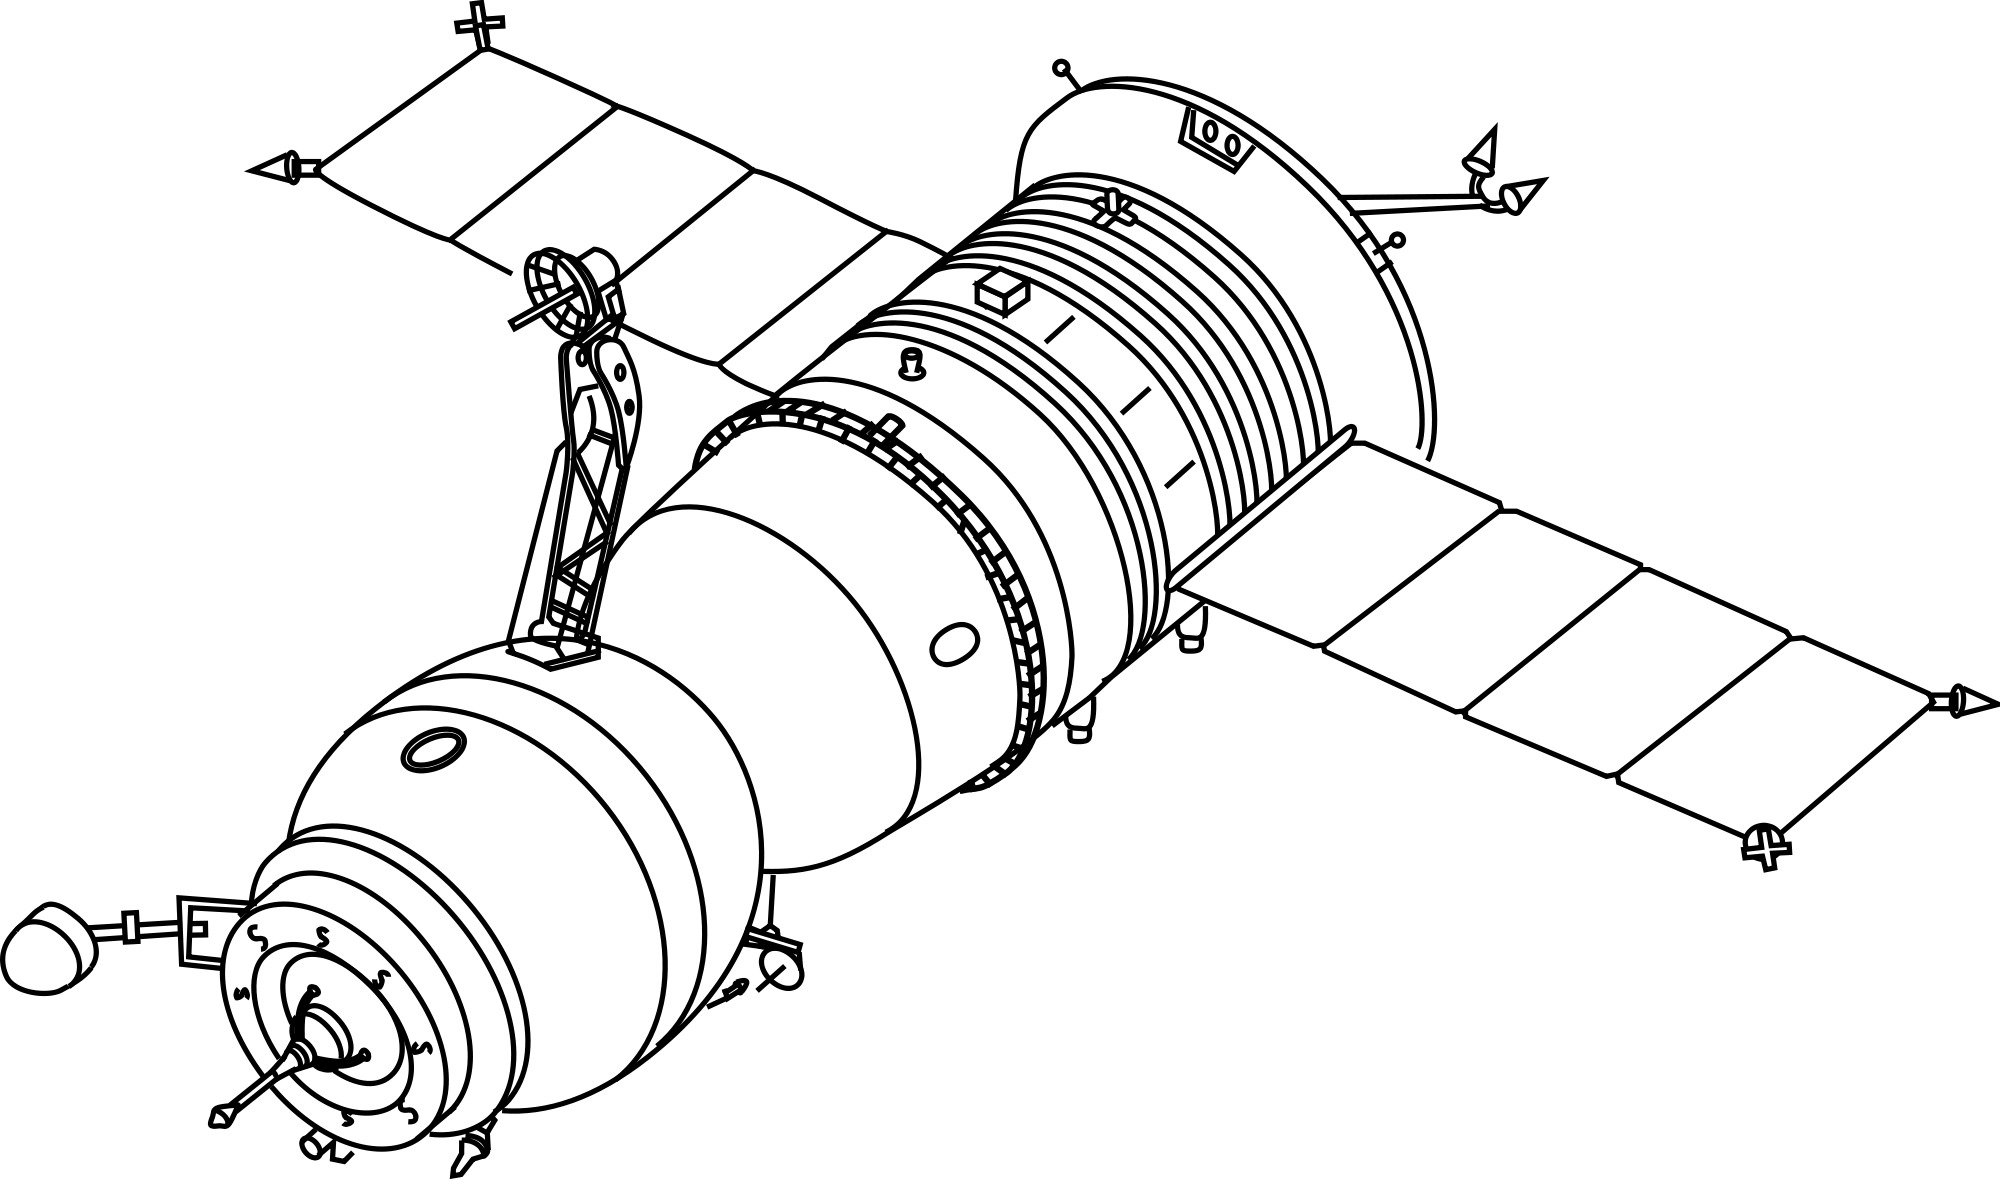 Soyuz Technical Drawing icons